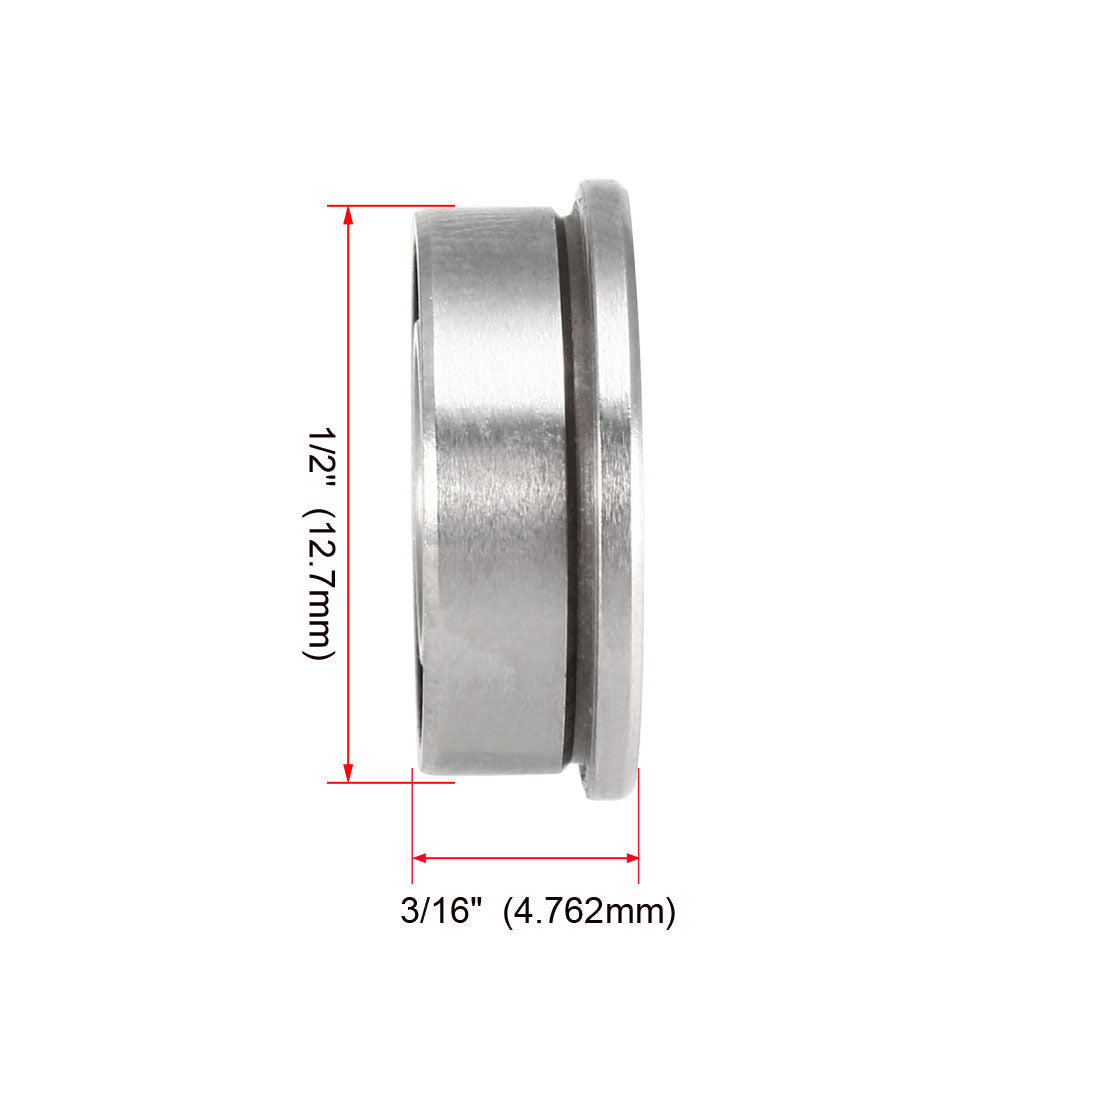 uxcell Uxcell FR188-2RS Flange Ball 1/4" x 1/2" x 3/16" Double Sealed (GCr15) Chrome Steel Bearings 2pcs